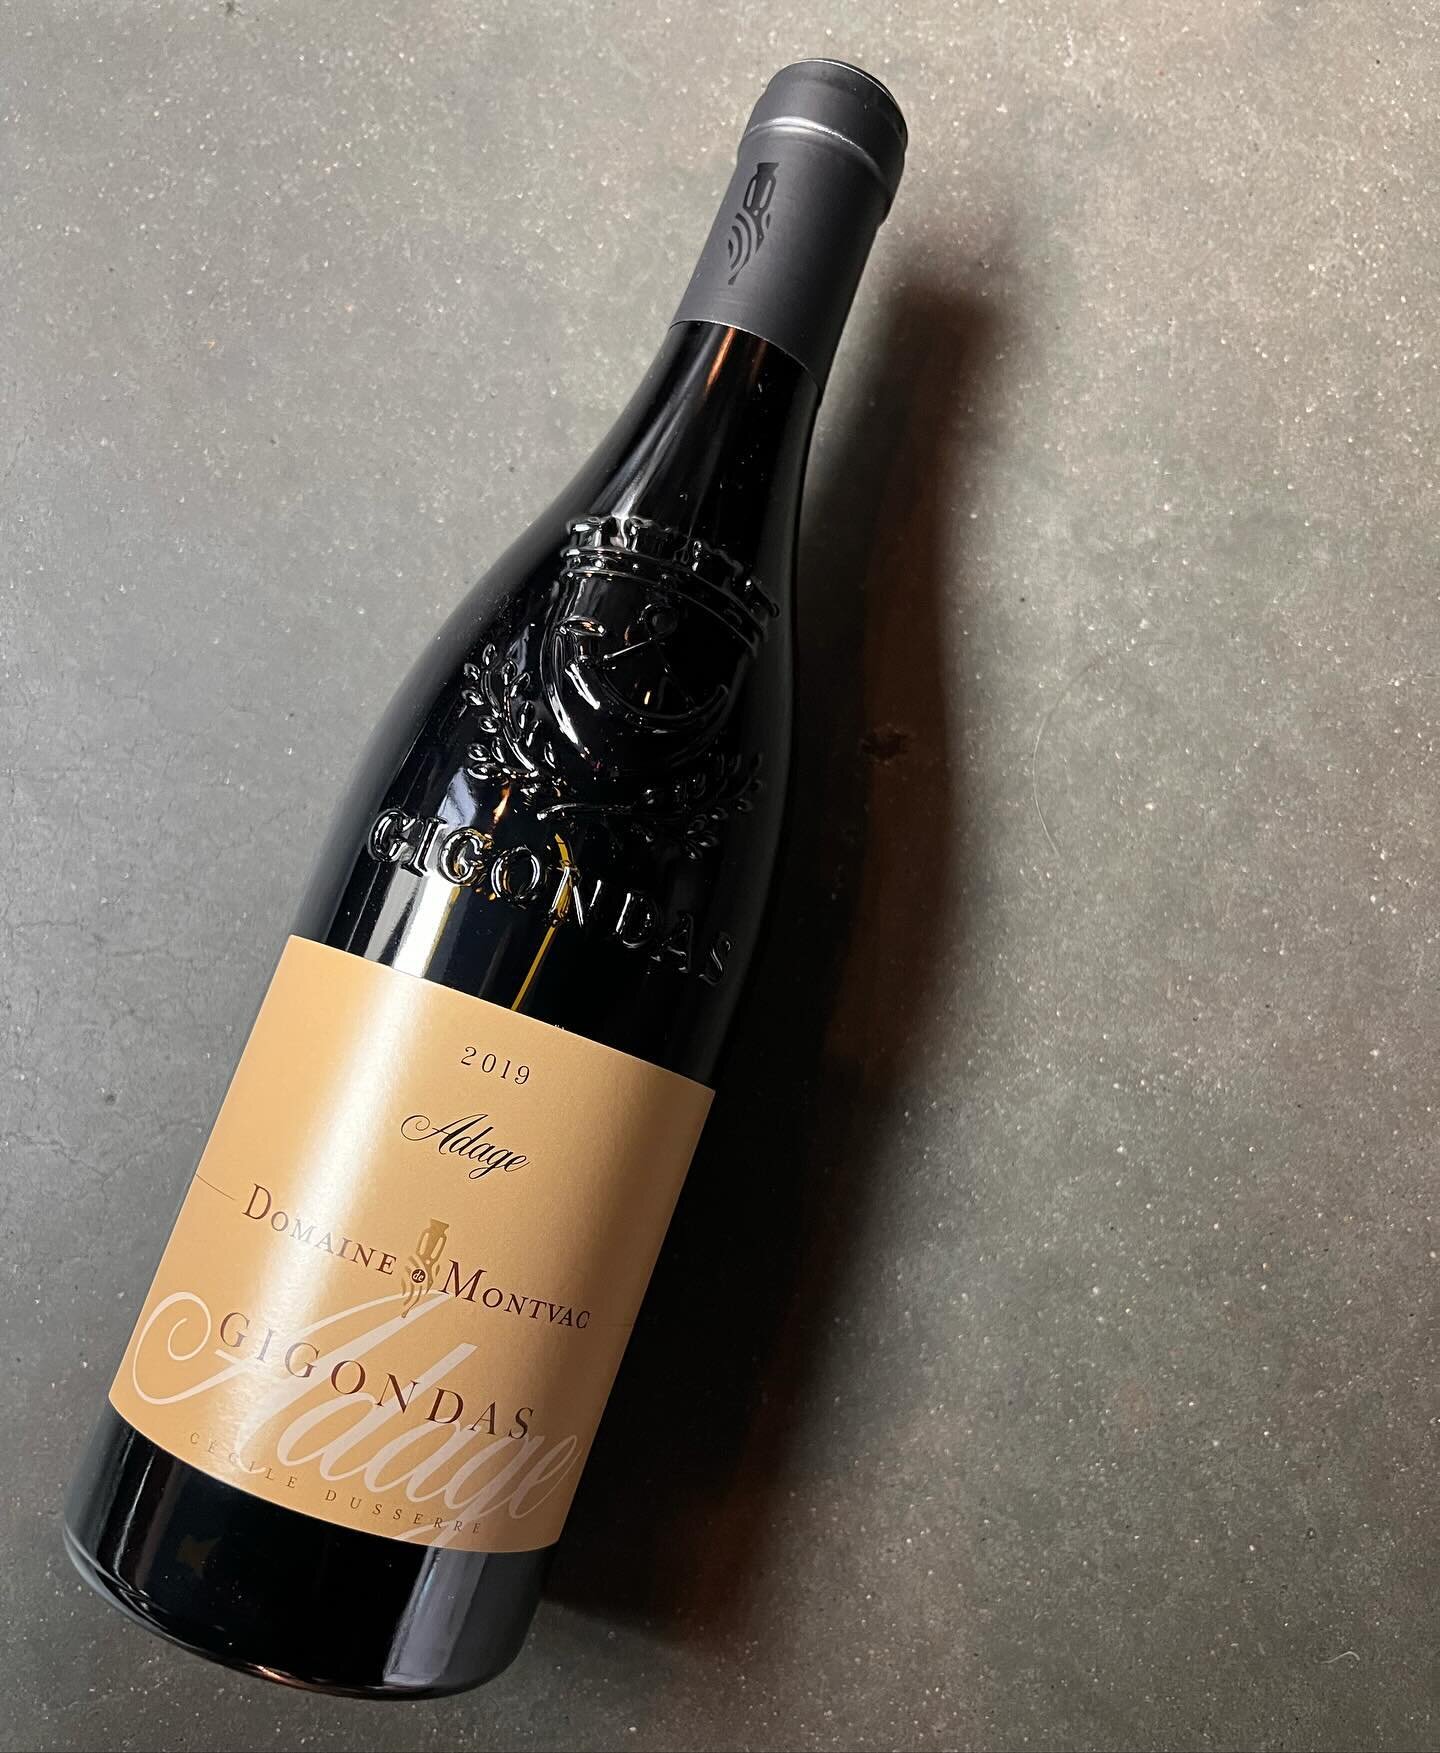 As we start to close out #womenshistorymonth we can't help but introduce you to this beautiful blend of Grenache, Syrah &amp; Mourv&egrave;dre from the talented women behind @domainedemontvac 👯&zwj;♀️👯&zwj;♀️

Bold earth tones flood your palate wit